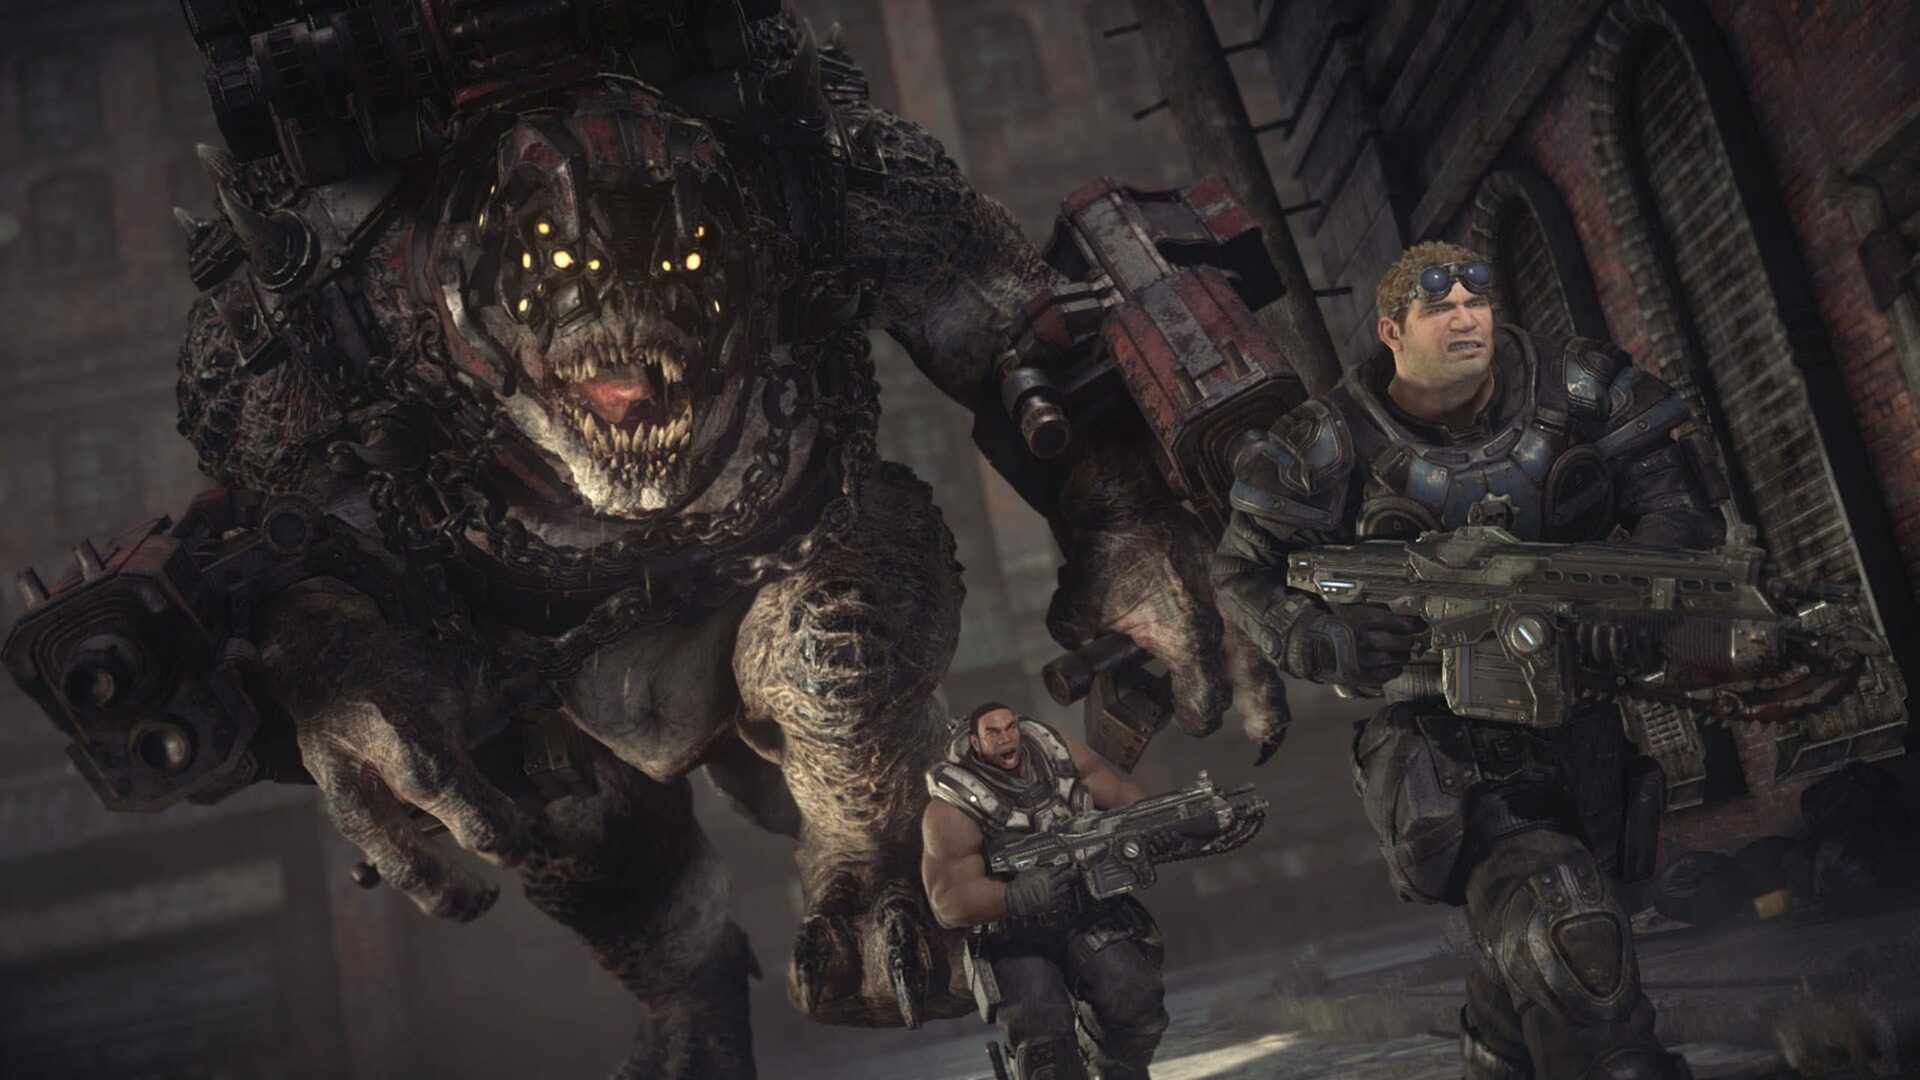 Game Gears of War: Ultimate Edition - XBOX ONE - GAMES E CONSOLES - GAME  XBOX 360 / ONE : PC Informática